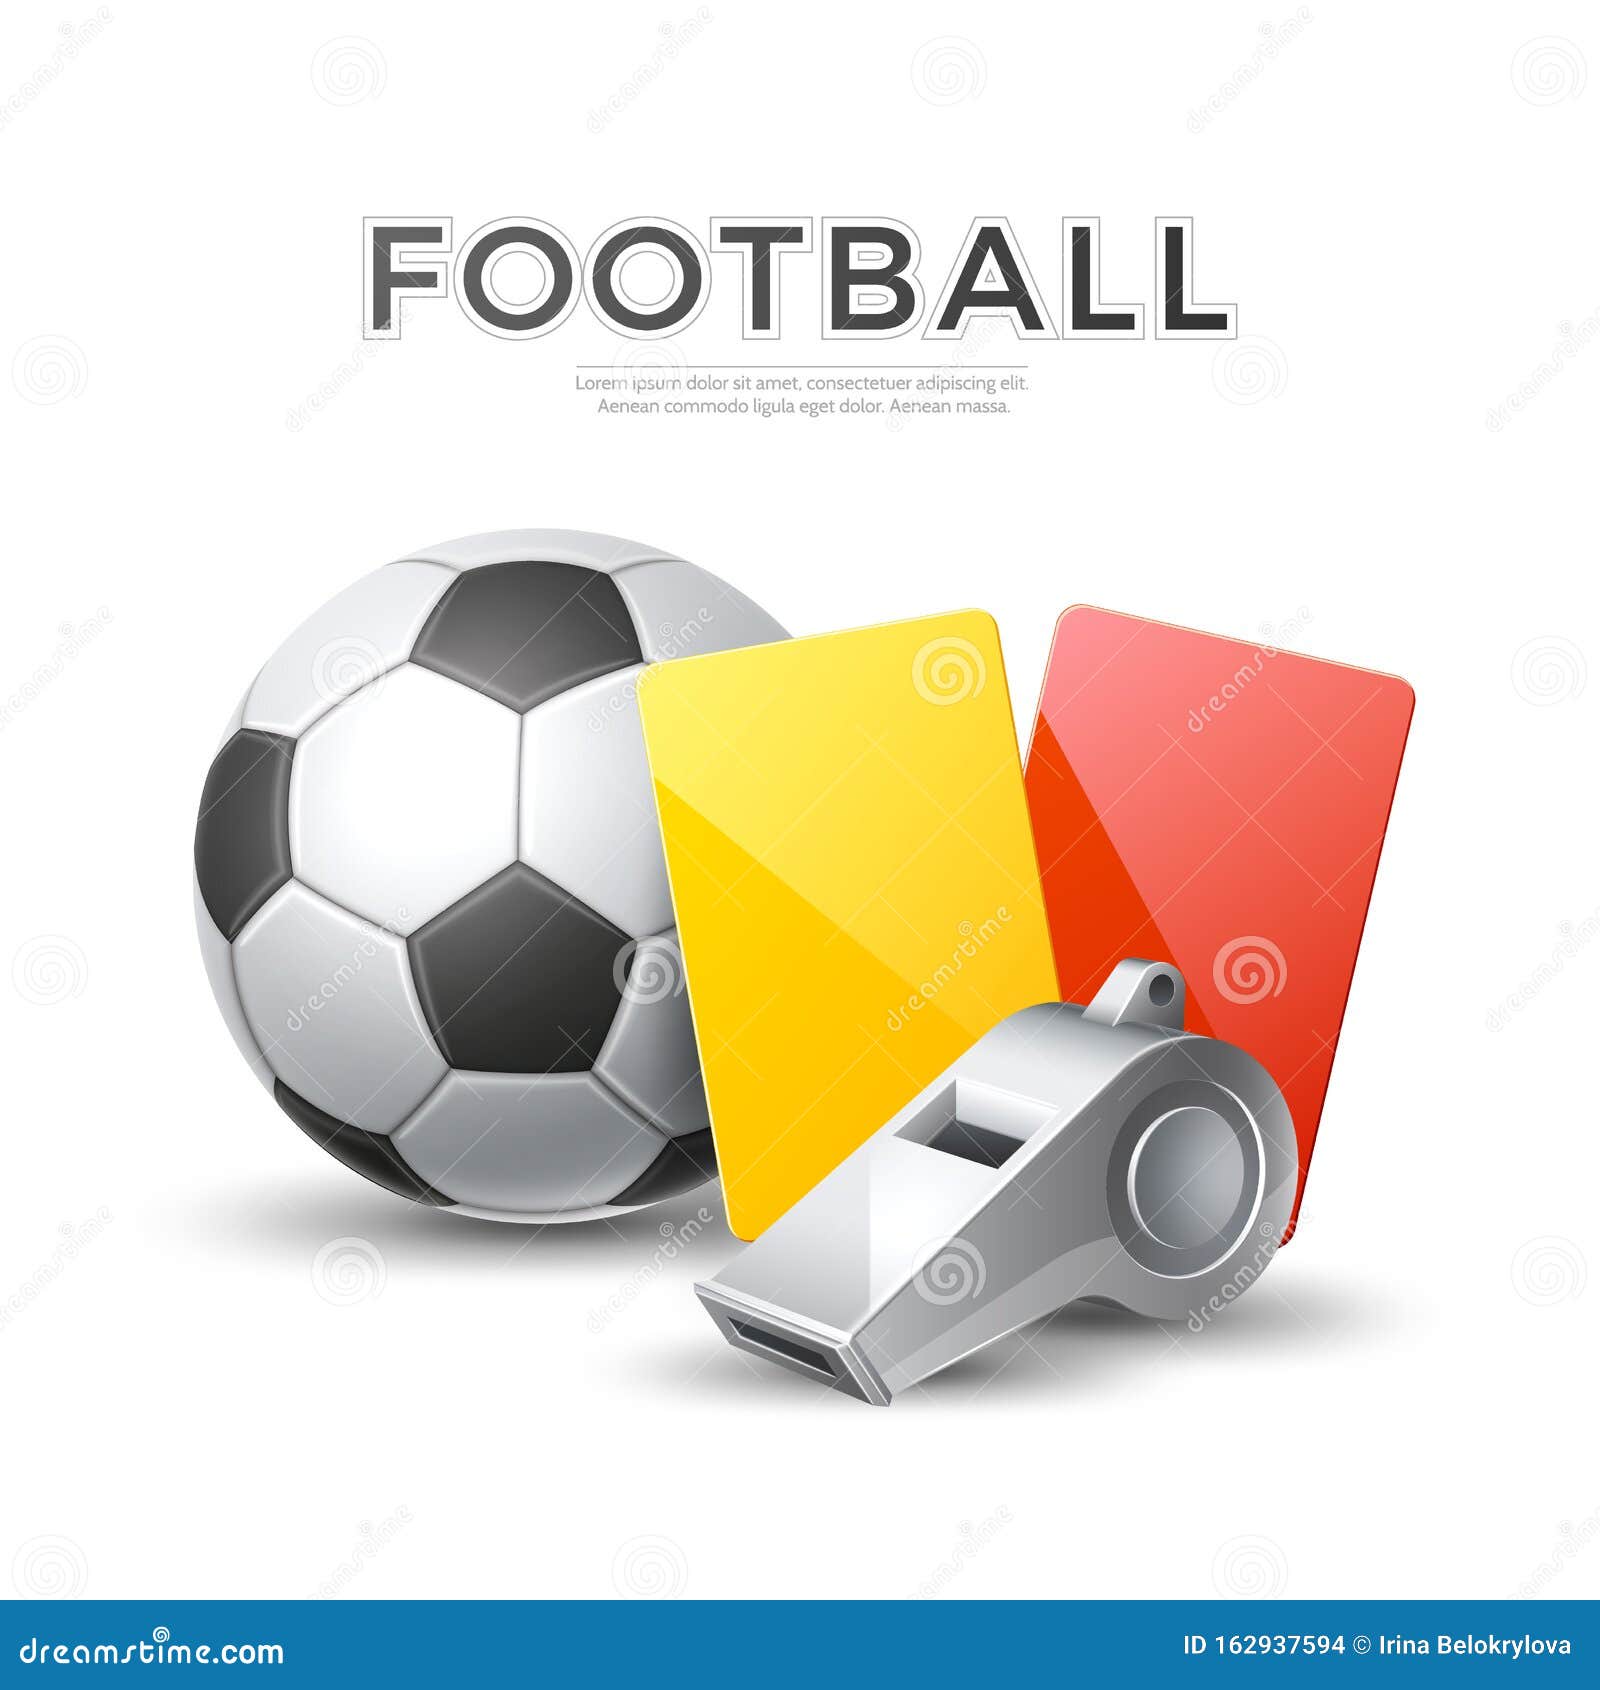 Referee Poster Stock Illustrations – 23 Referee Poster Stock For Soccer Referee Game Card Template